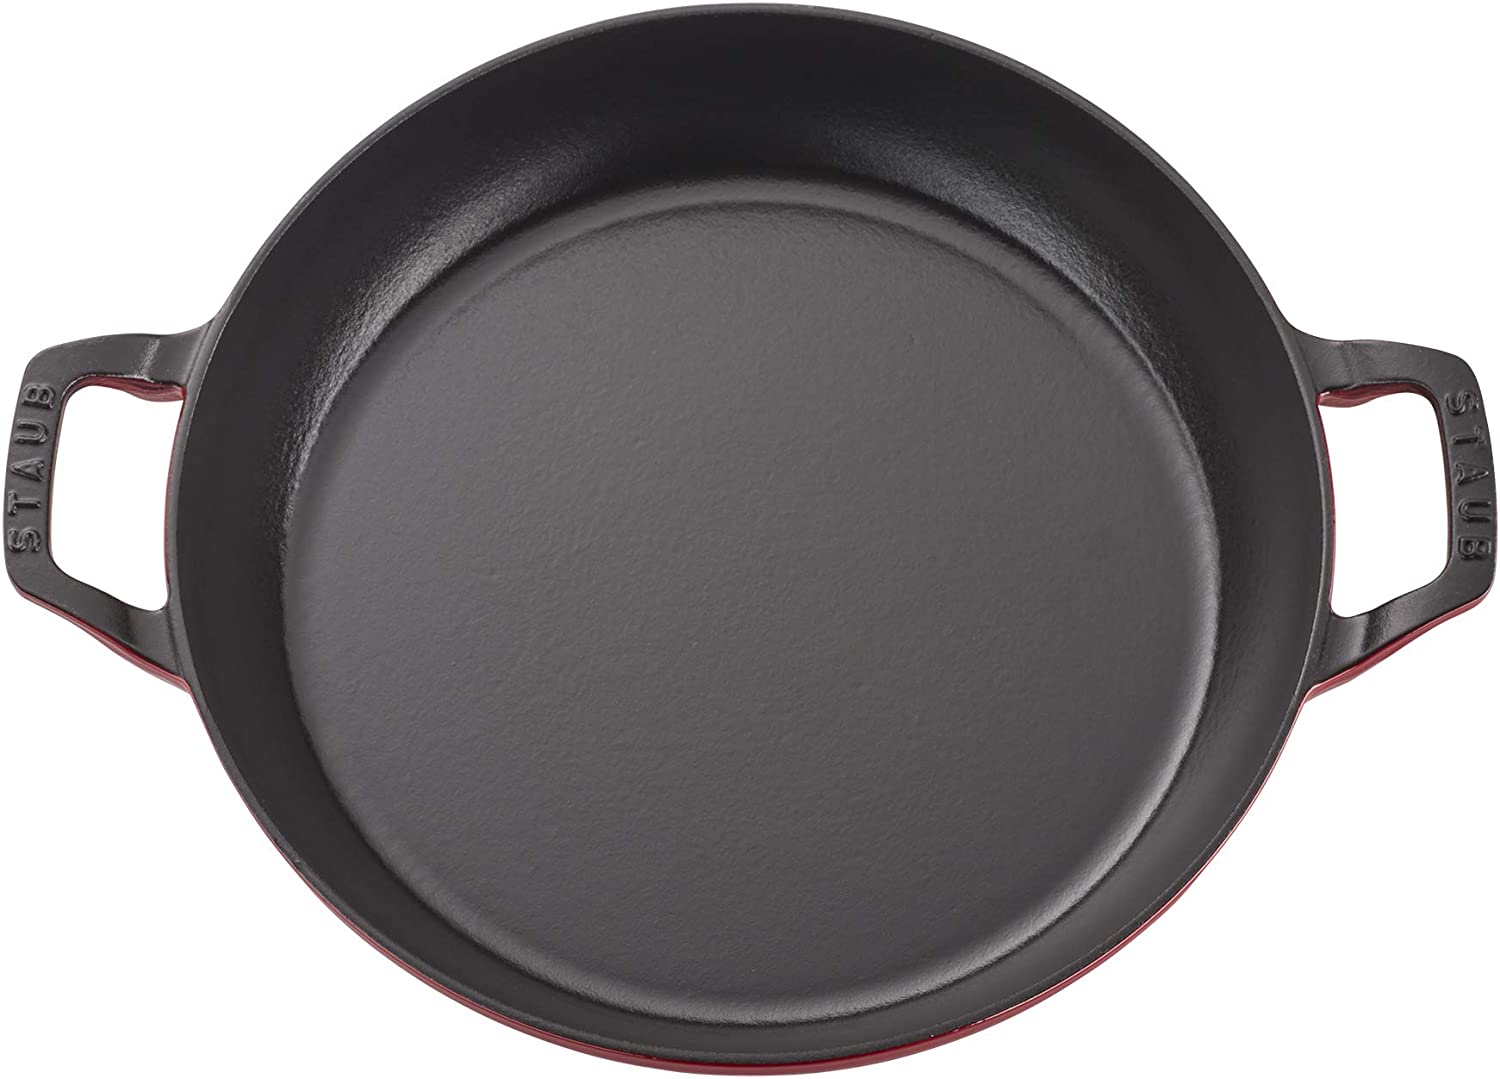 Essential Enameled Cast Iron French Oven – Everlastly